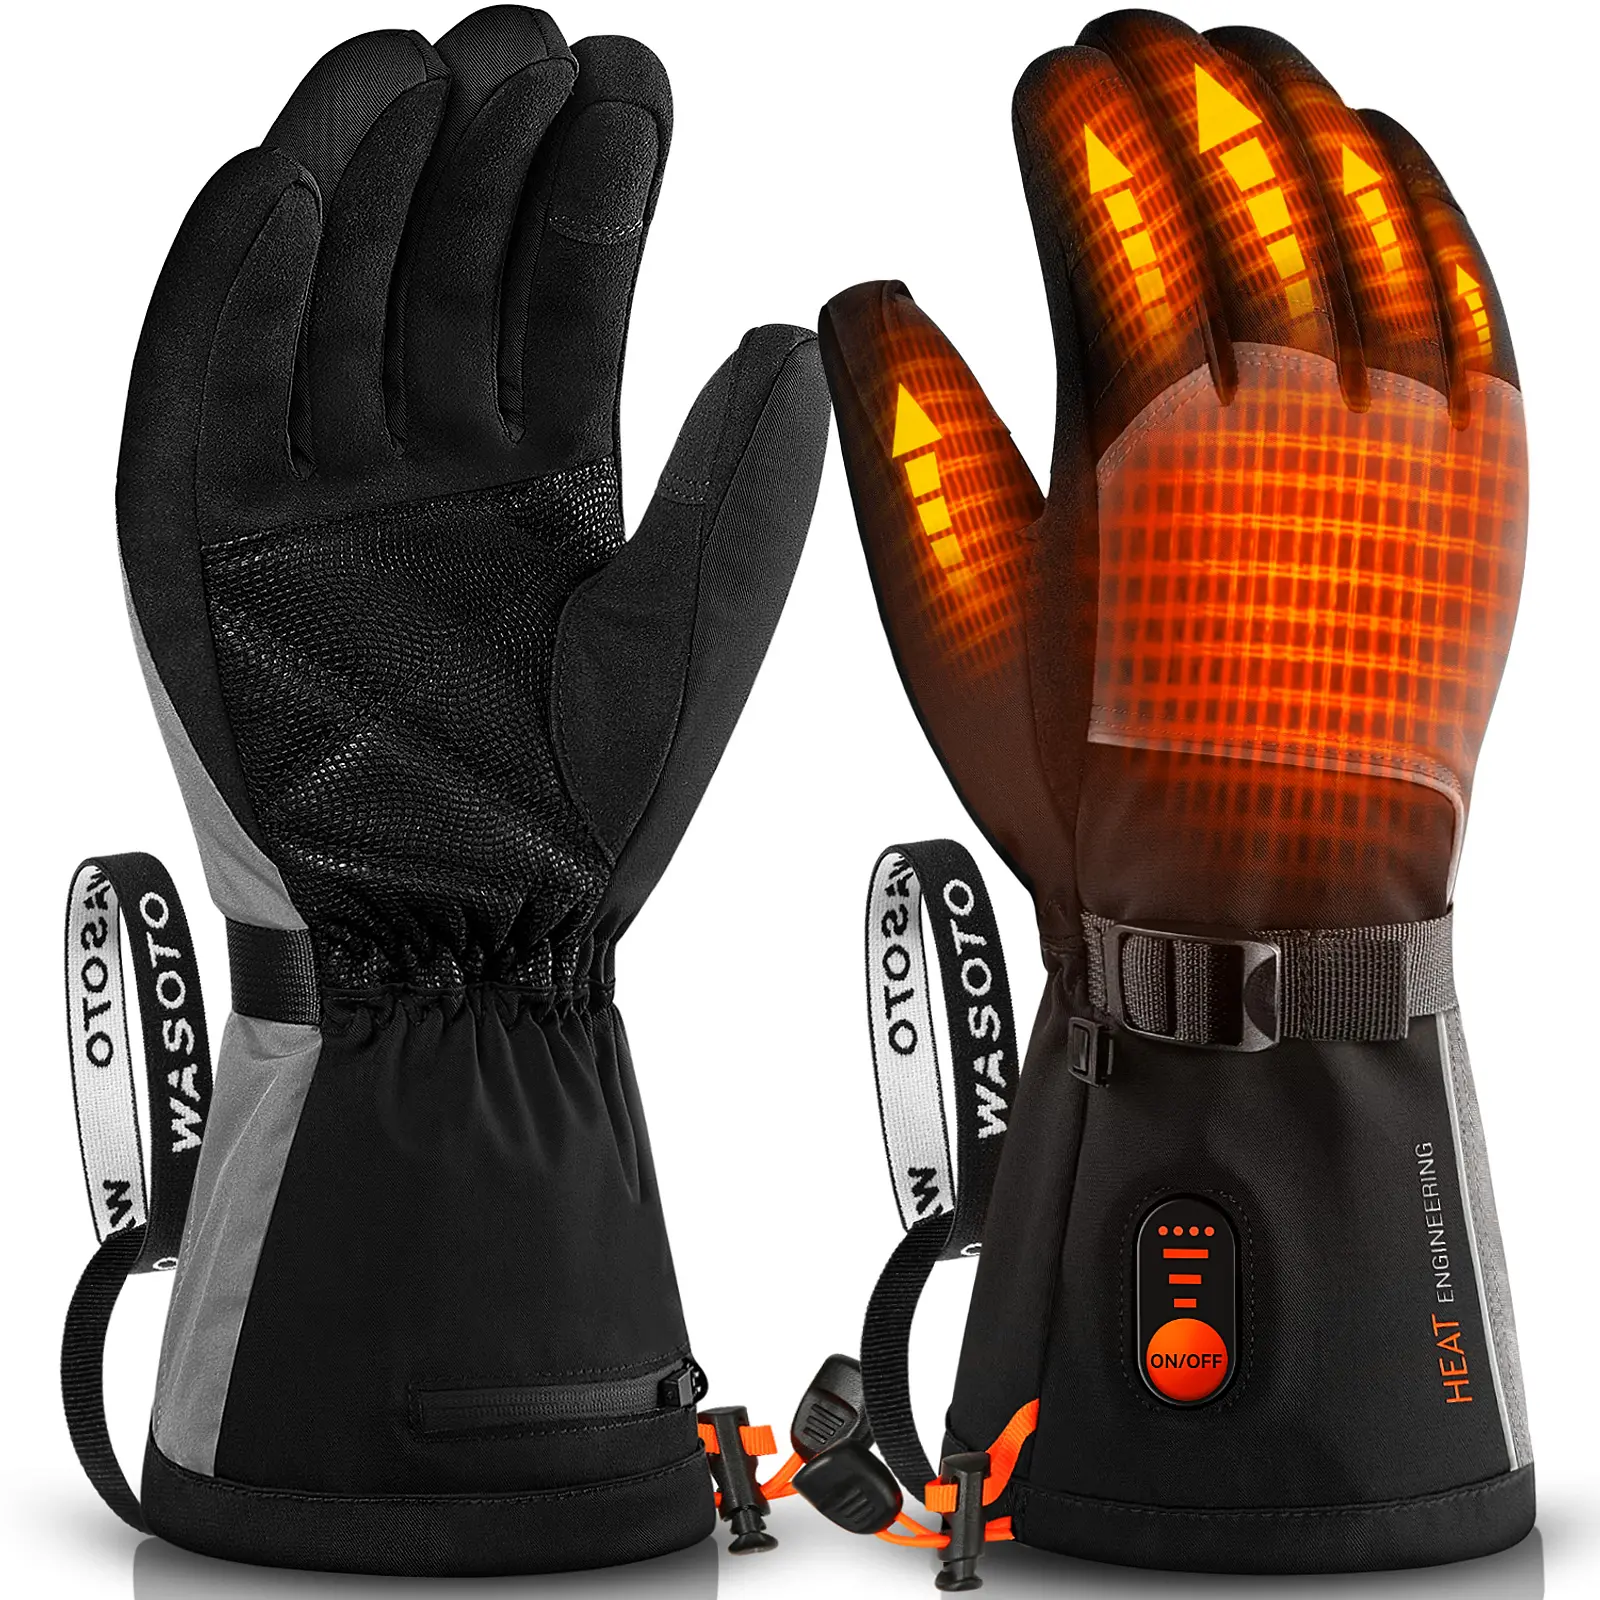 Golden Supplier Low Price Li-lion 7.4V Heated Riding Skiing Hunting Cycling Gloves for Men Women